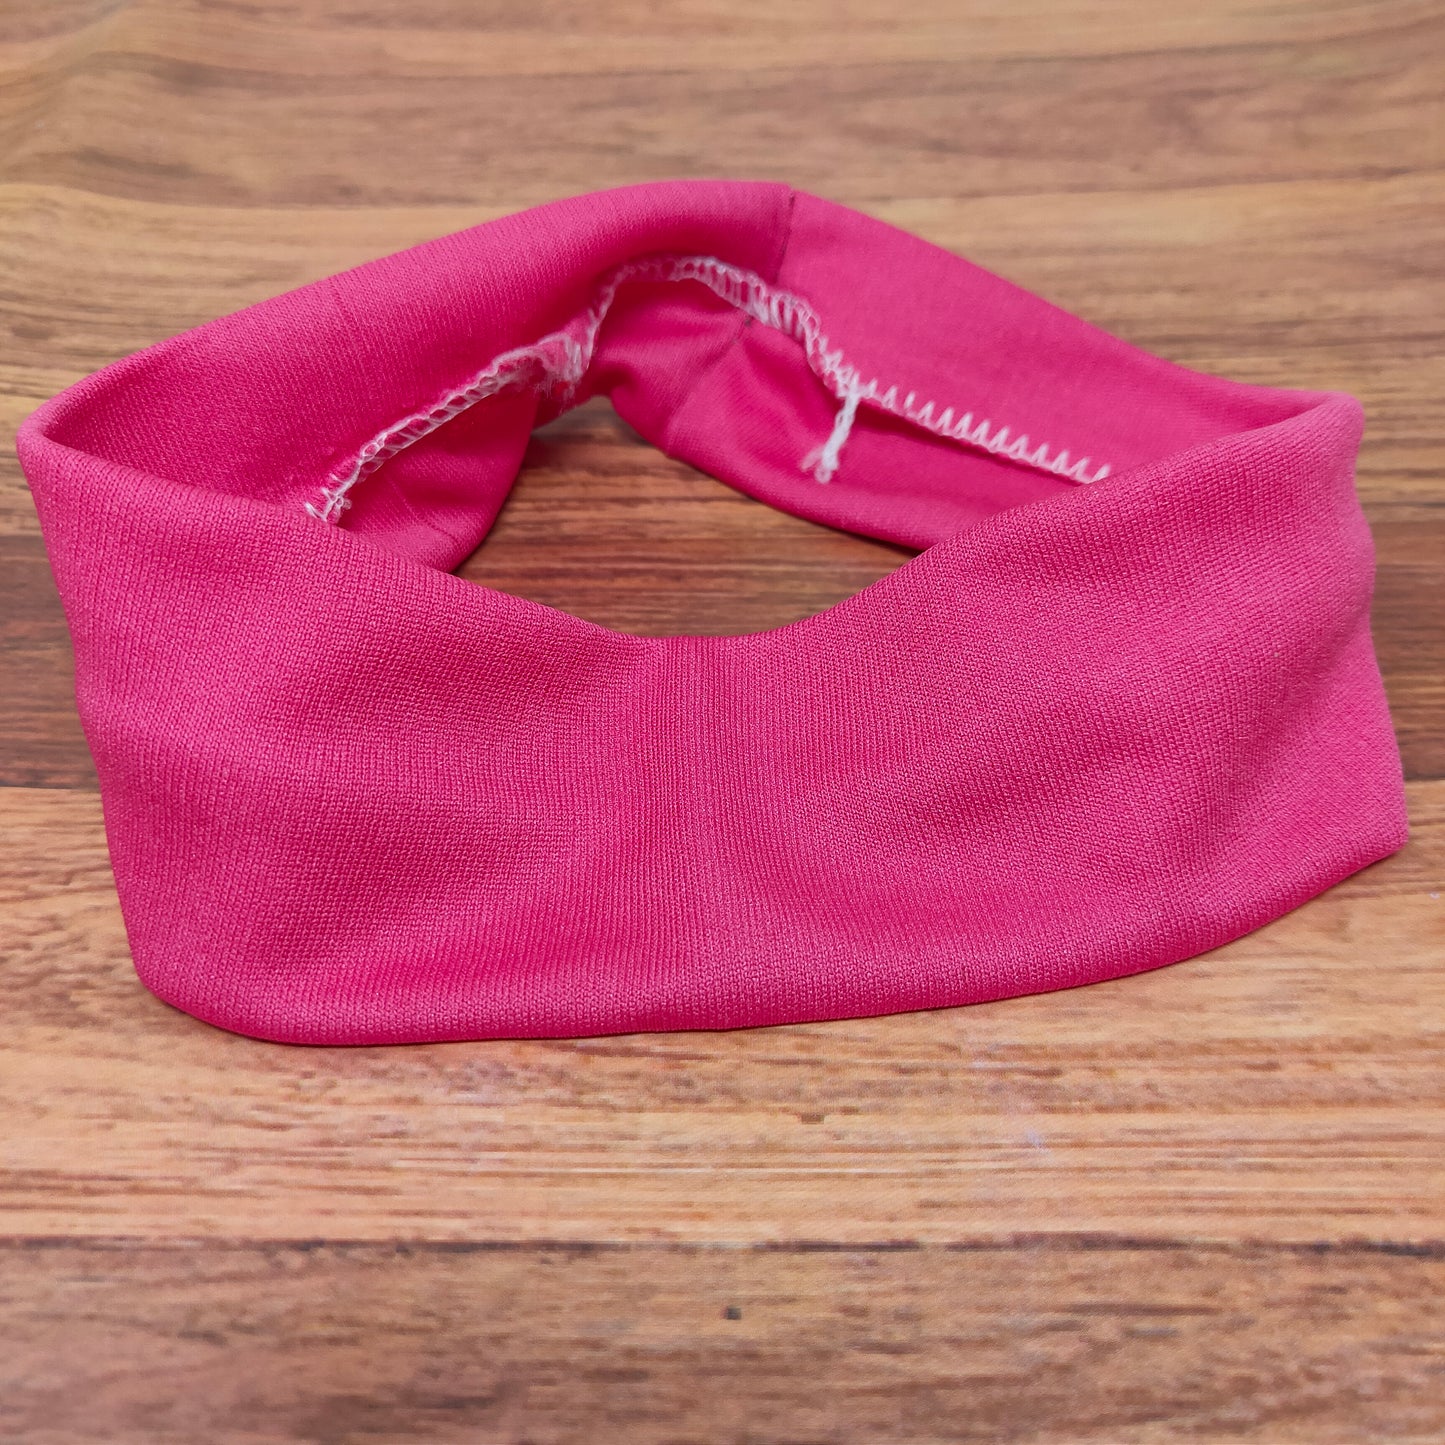 Plain Soft Stretchy Headbands for Girls and Women for Yoga and Workout (17-39 Headband)